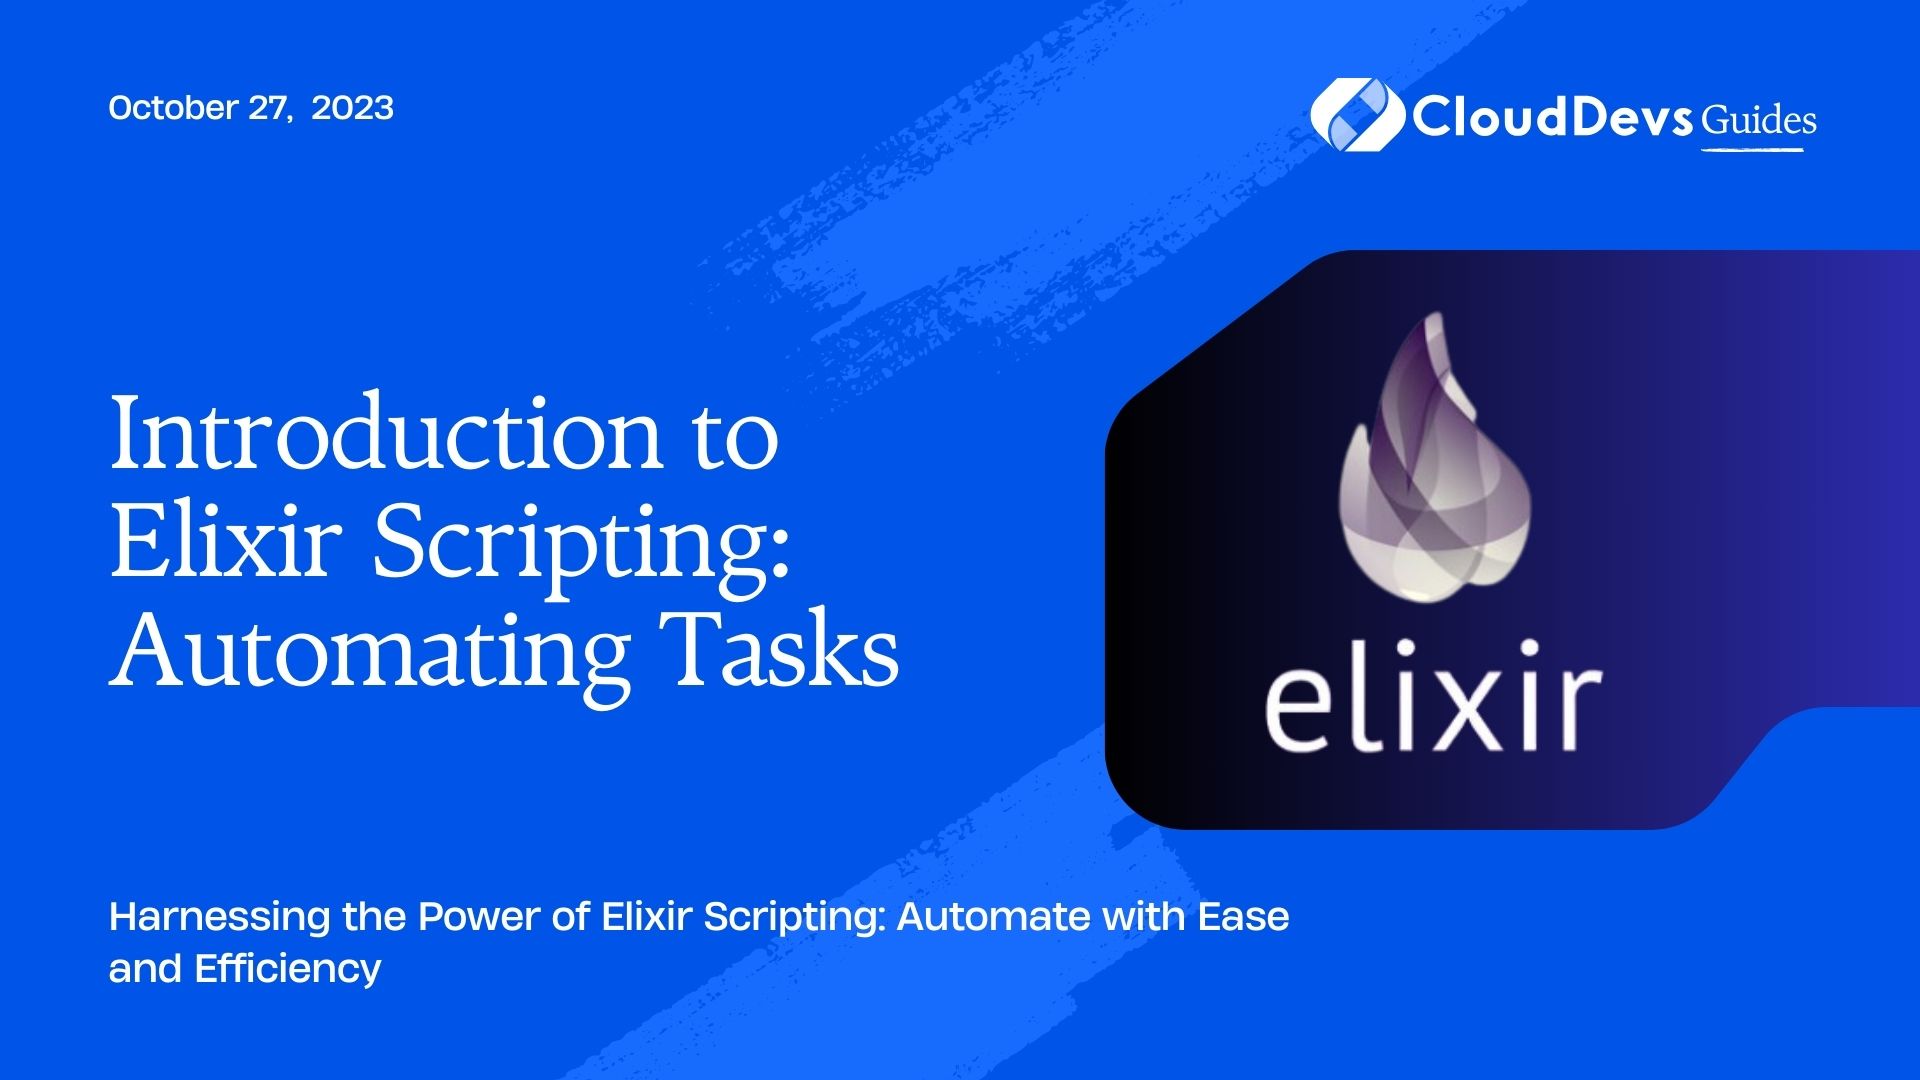 Introduction to Elixir Scripting: Automating Tasks